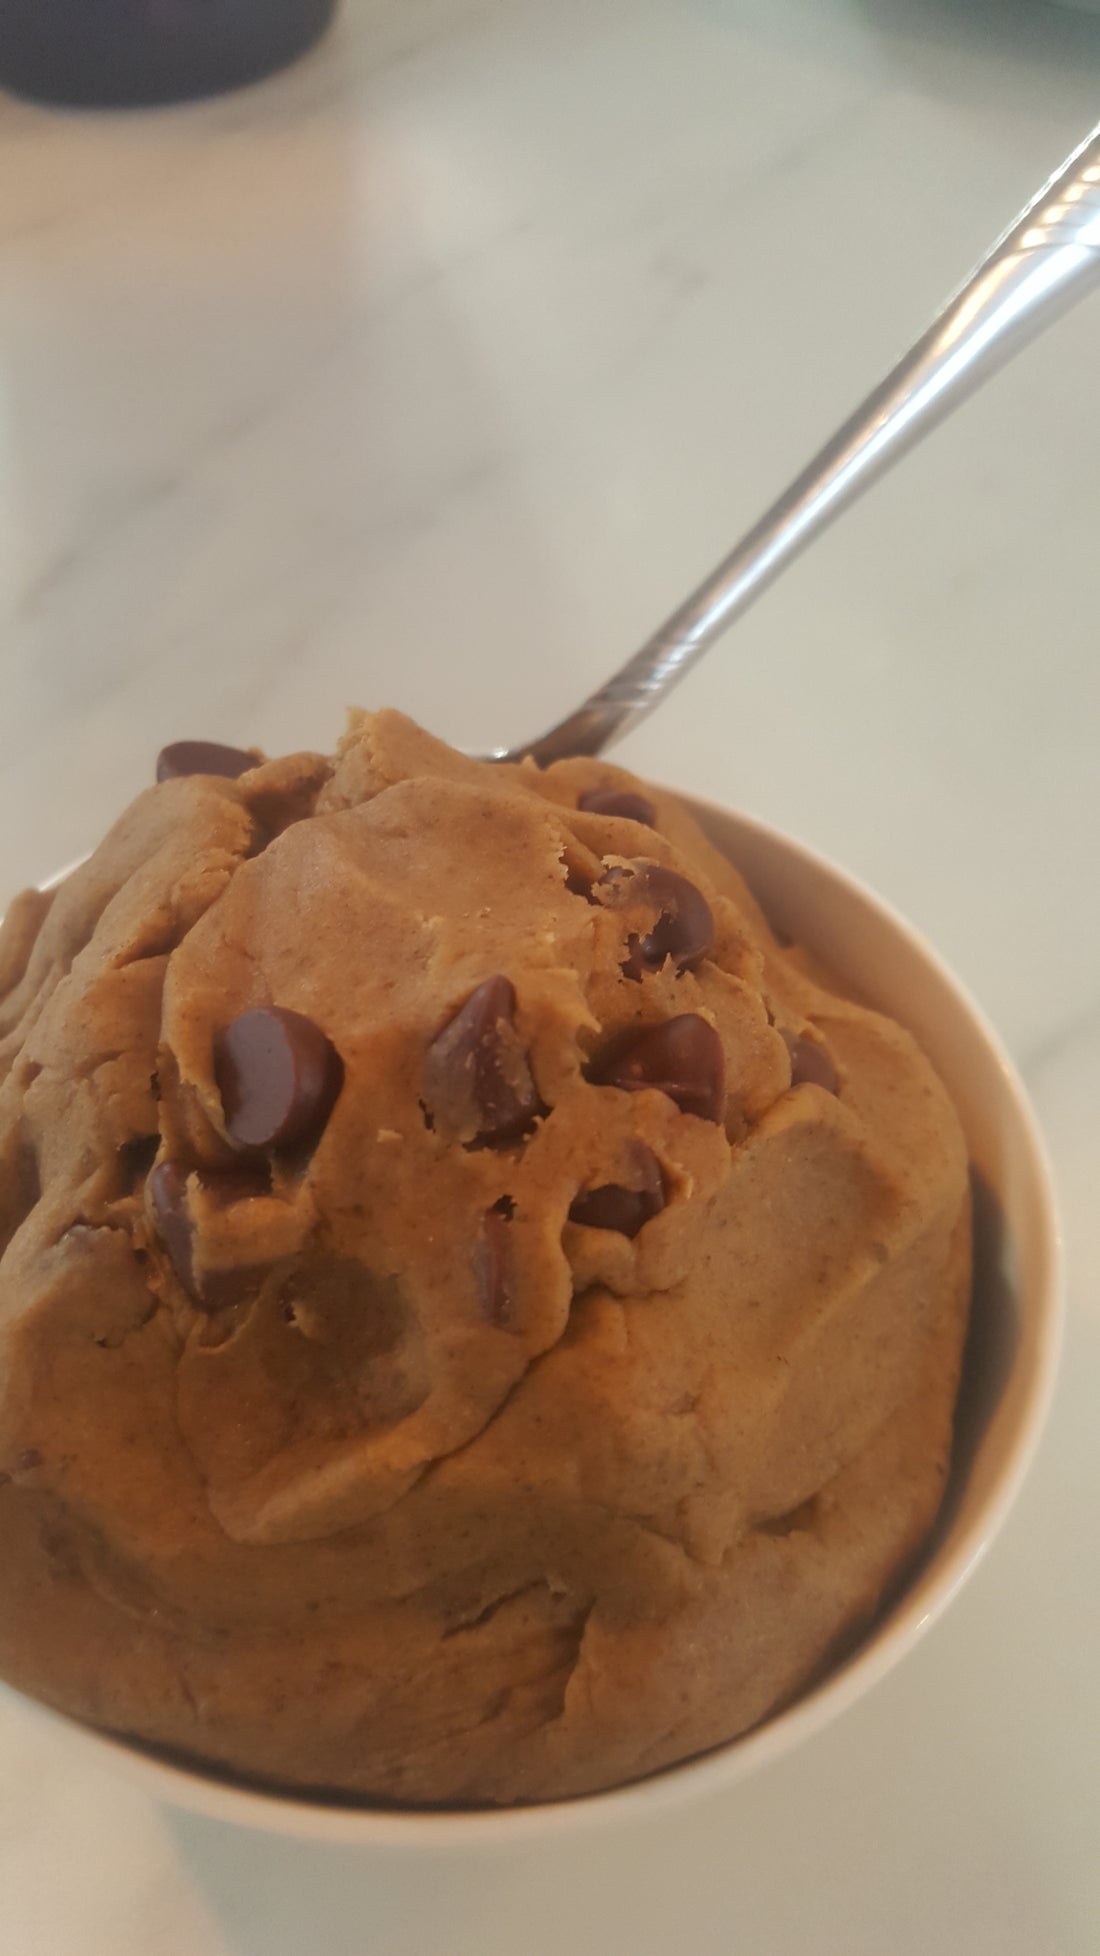 Healthy, Tasty, Eat-By-The-Spoon-And-Don't-Feel-Guilty-About-It Vegan Cookie Dough